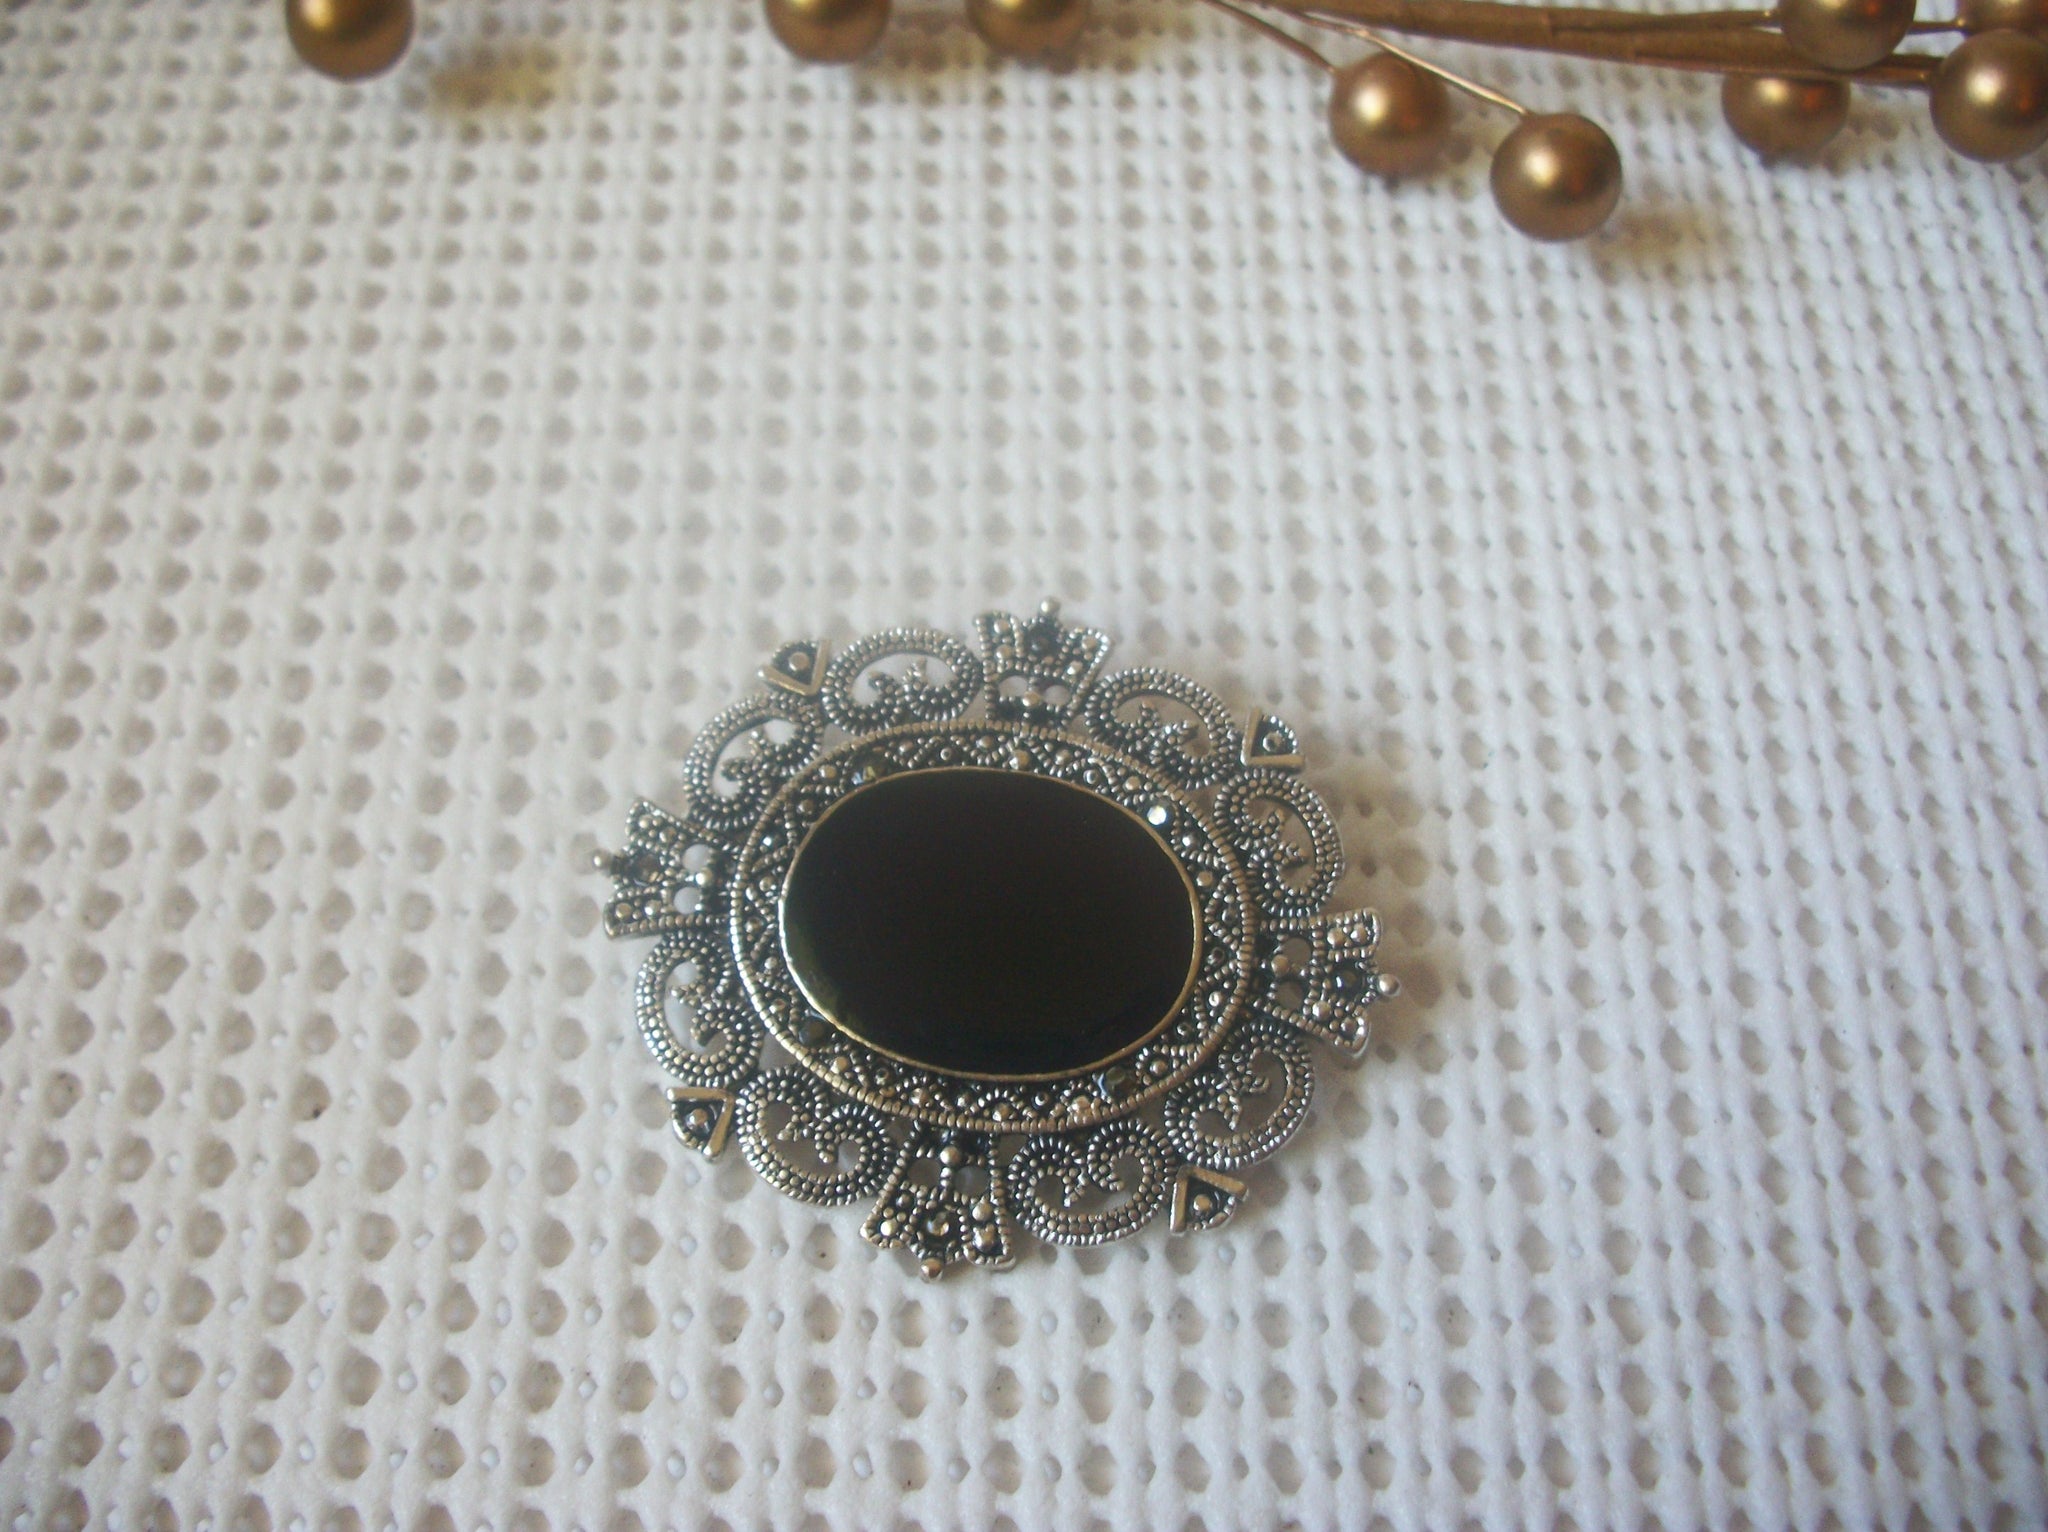 Vintage Jewelry, Victorian Inspired Royalty Black Cabochon Silver Tone, 52017